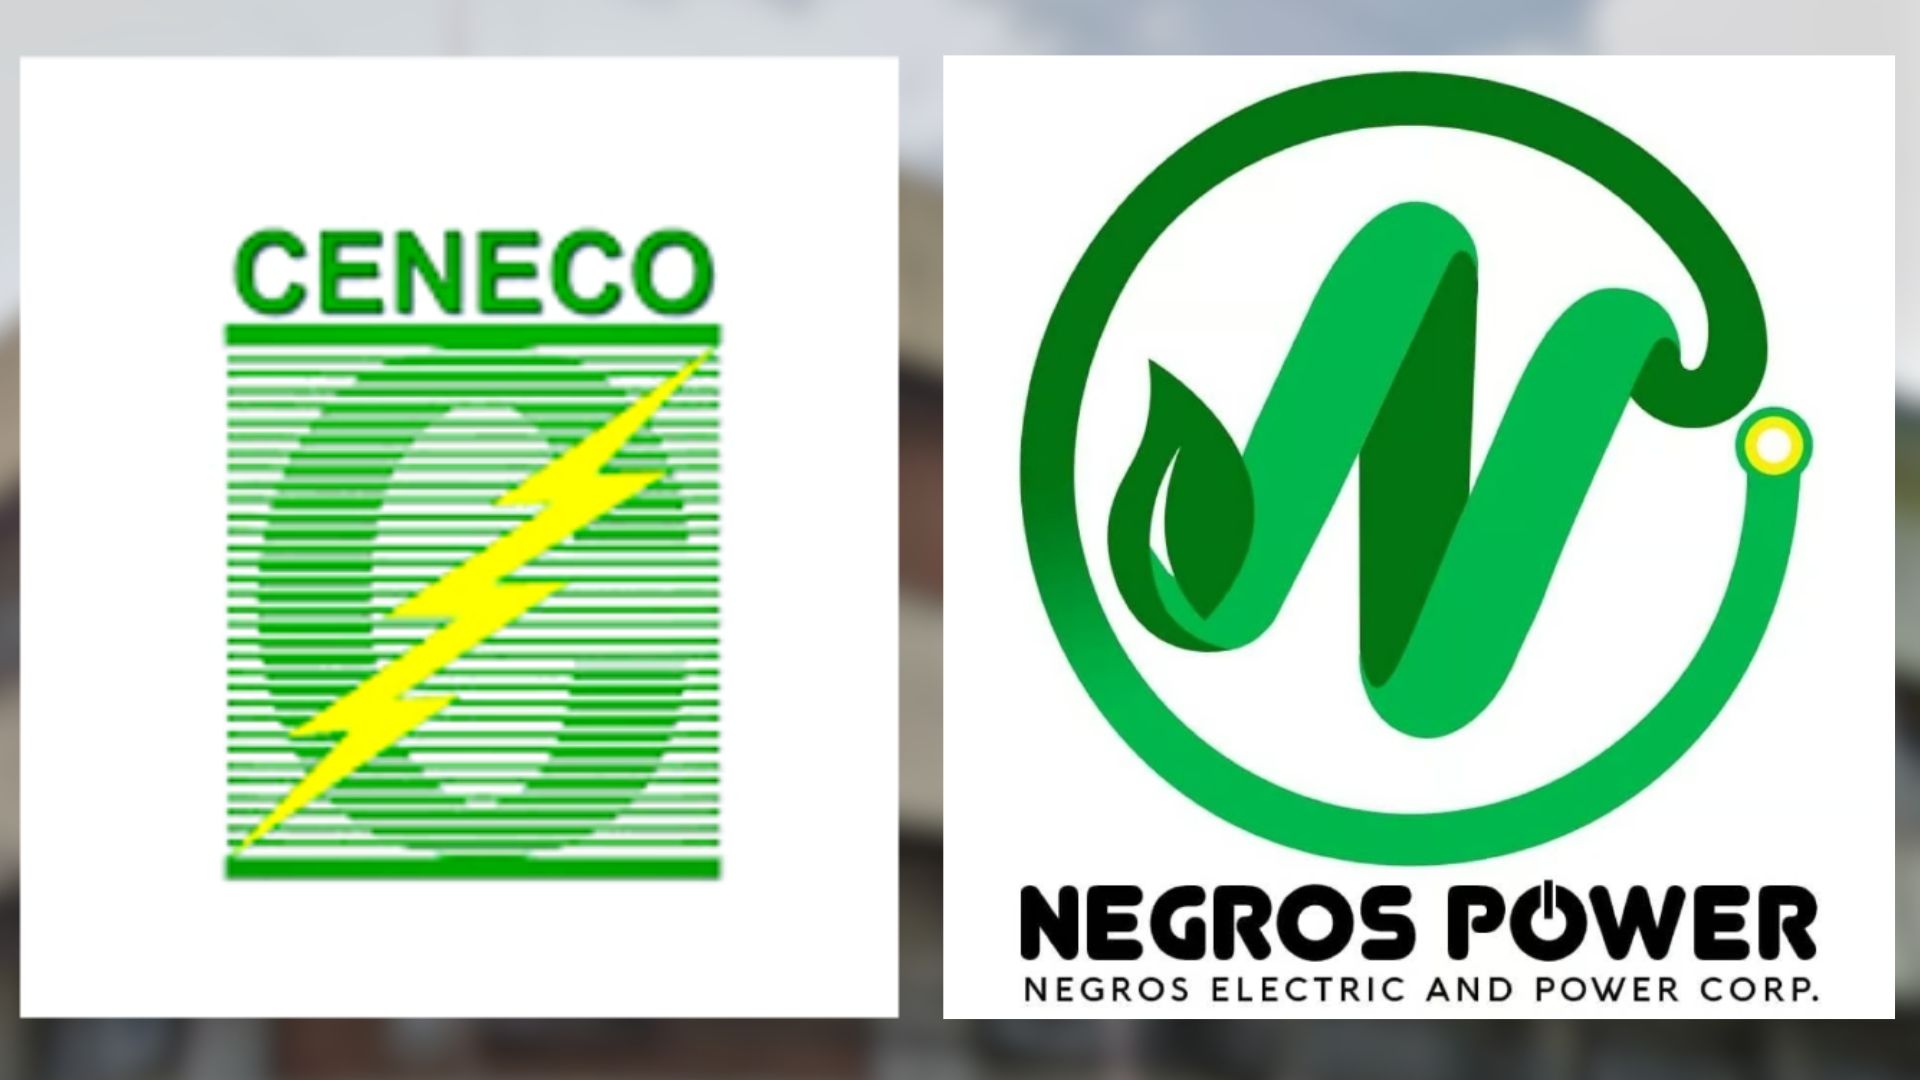 CENECO-NEPC joint venture to help ease power outages in Negros Occidental